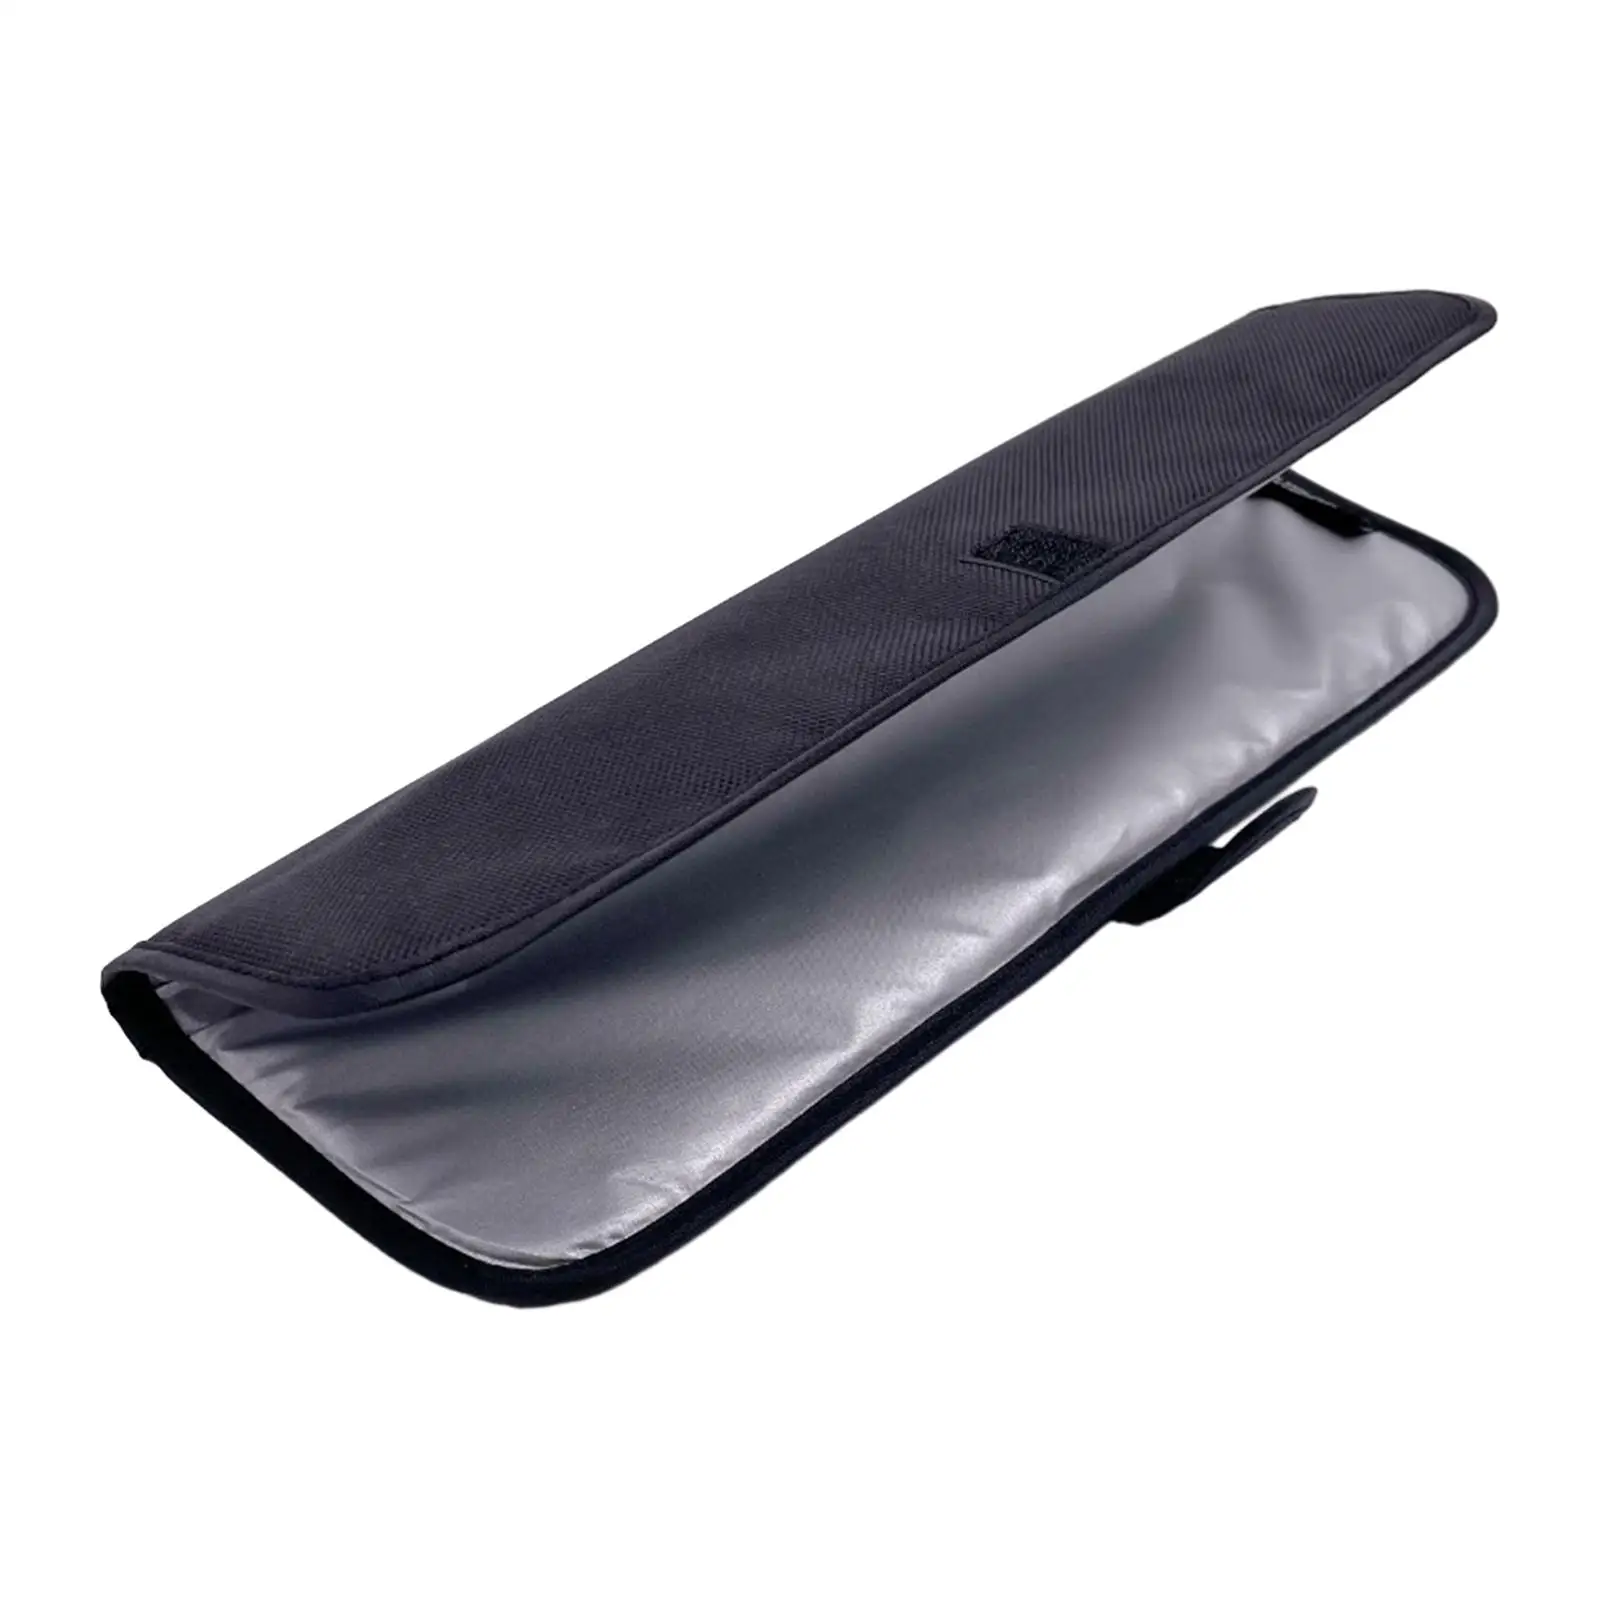 Curling Iron Cover Sleeve Portable Professional Flat Iron Travel Case for Clippers Curling Iron Trimmer Scissors Combs